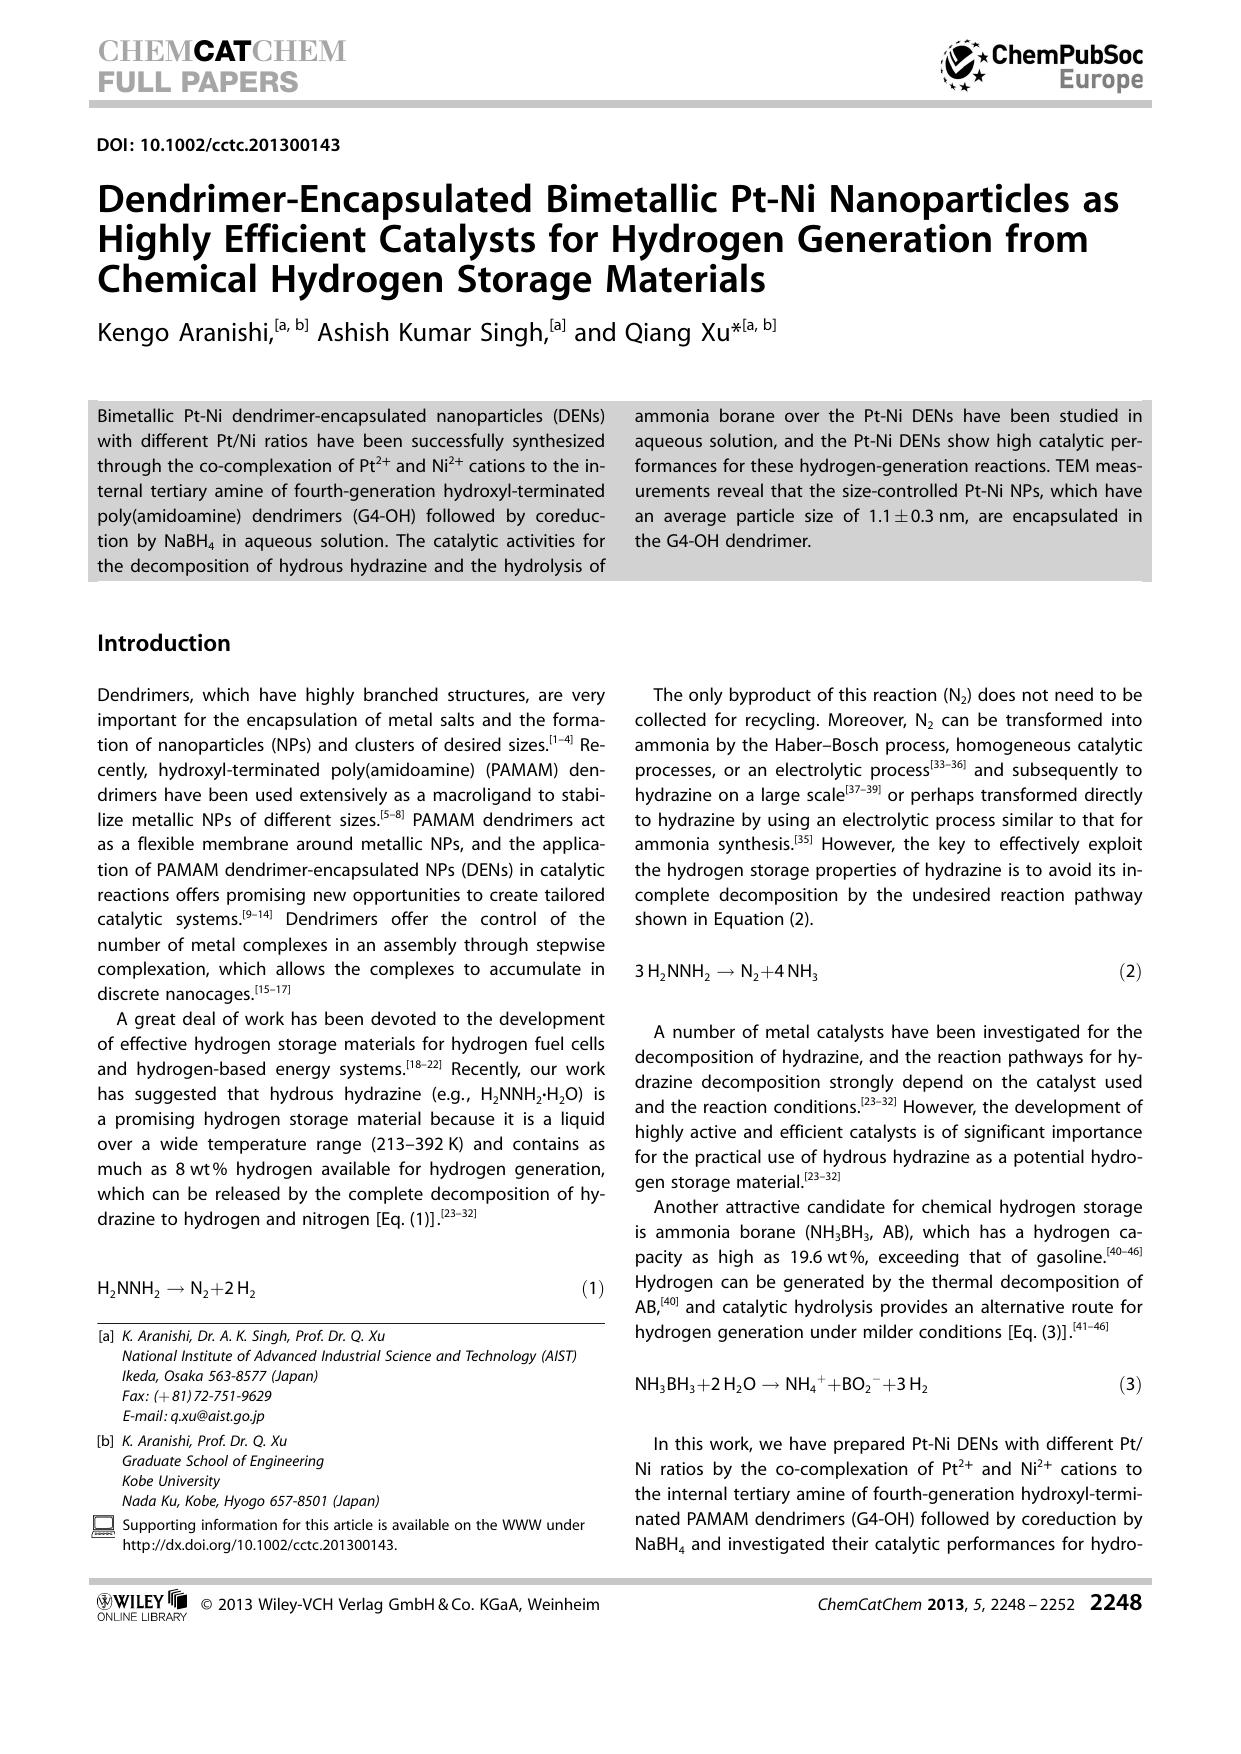 DendrimerEncapsulated Bimetallic PtNi Nanoparticles as Highly Efficient Catalysts for Hydrogen Generation from Chemical Hydrogen Storage Materials by Unknown